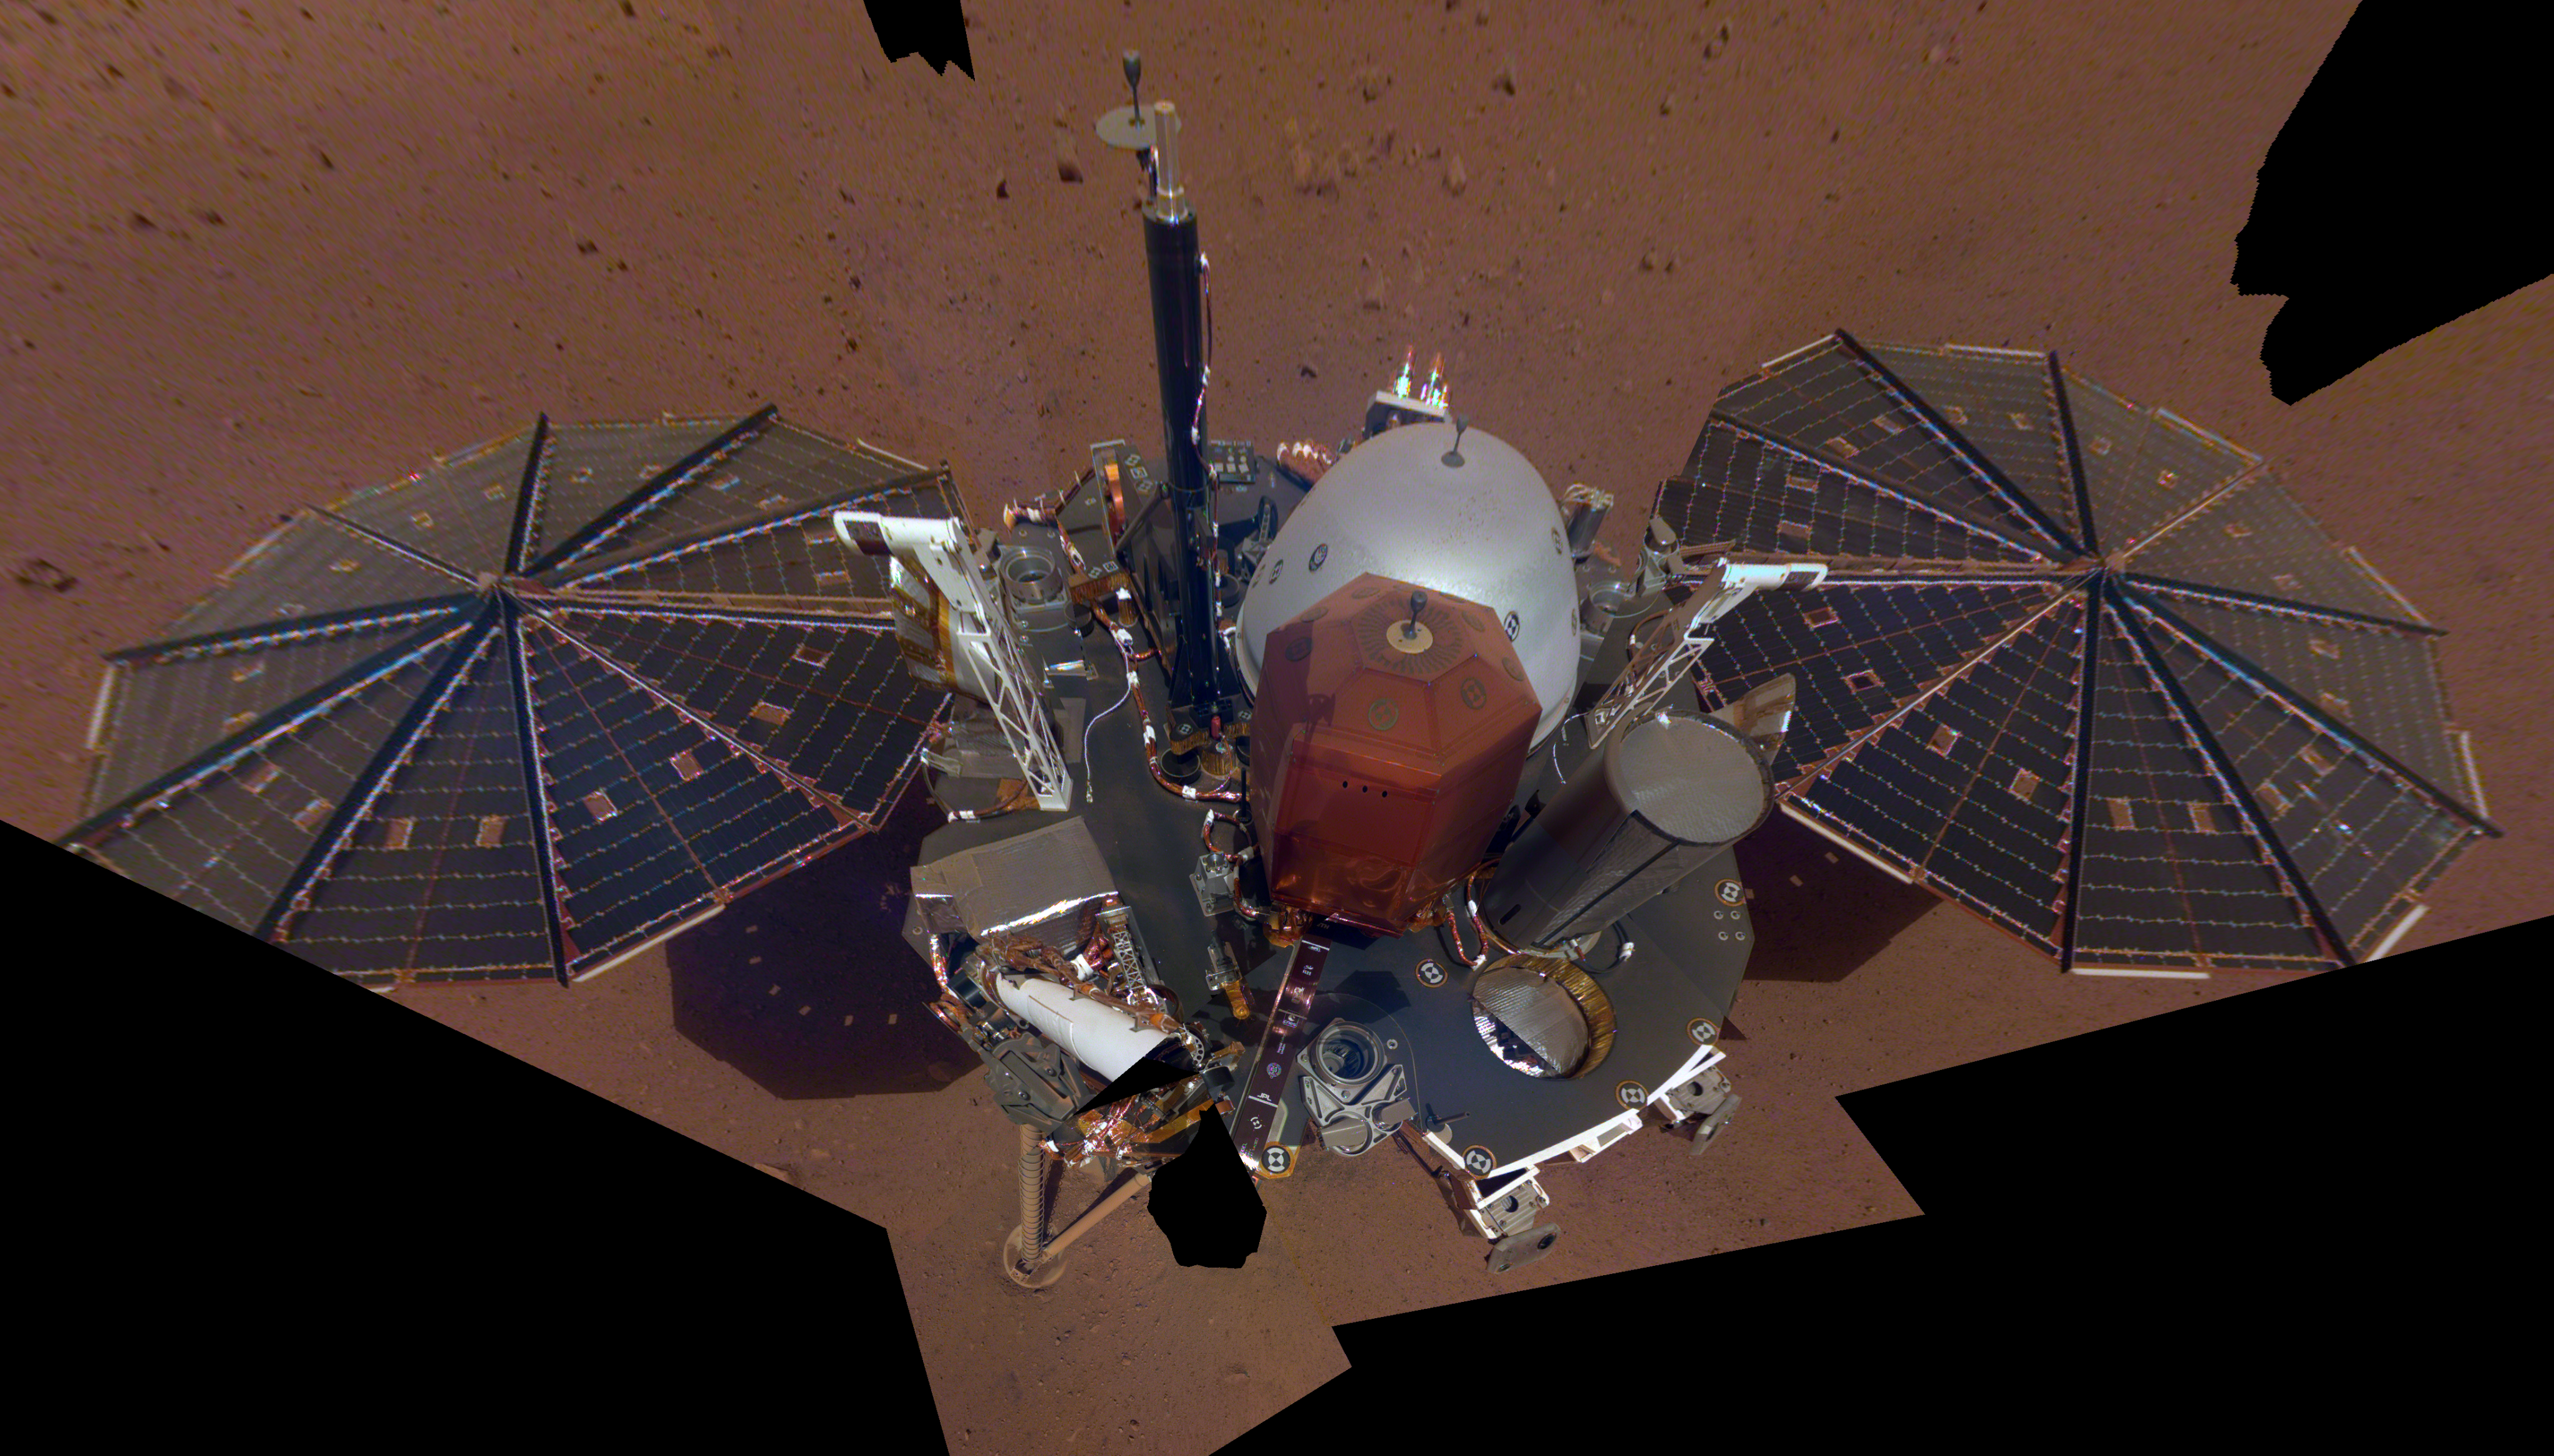 This composite image shows the entire InSight lander on the surface of Mars.